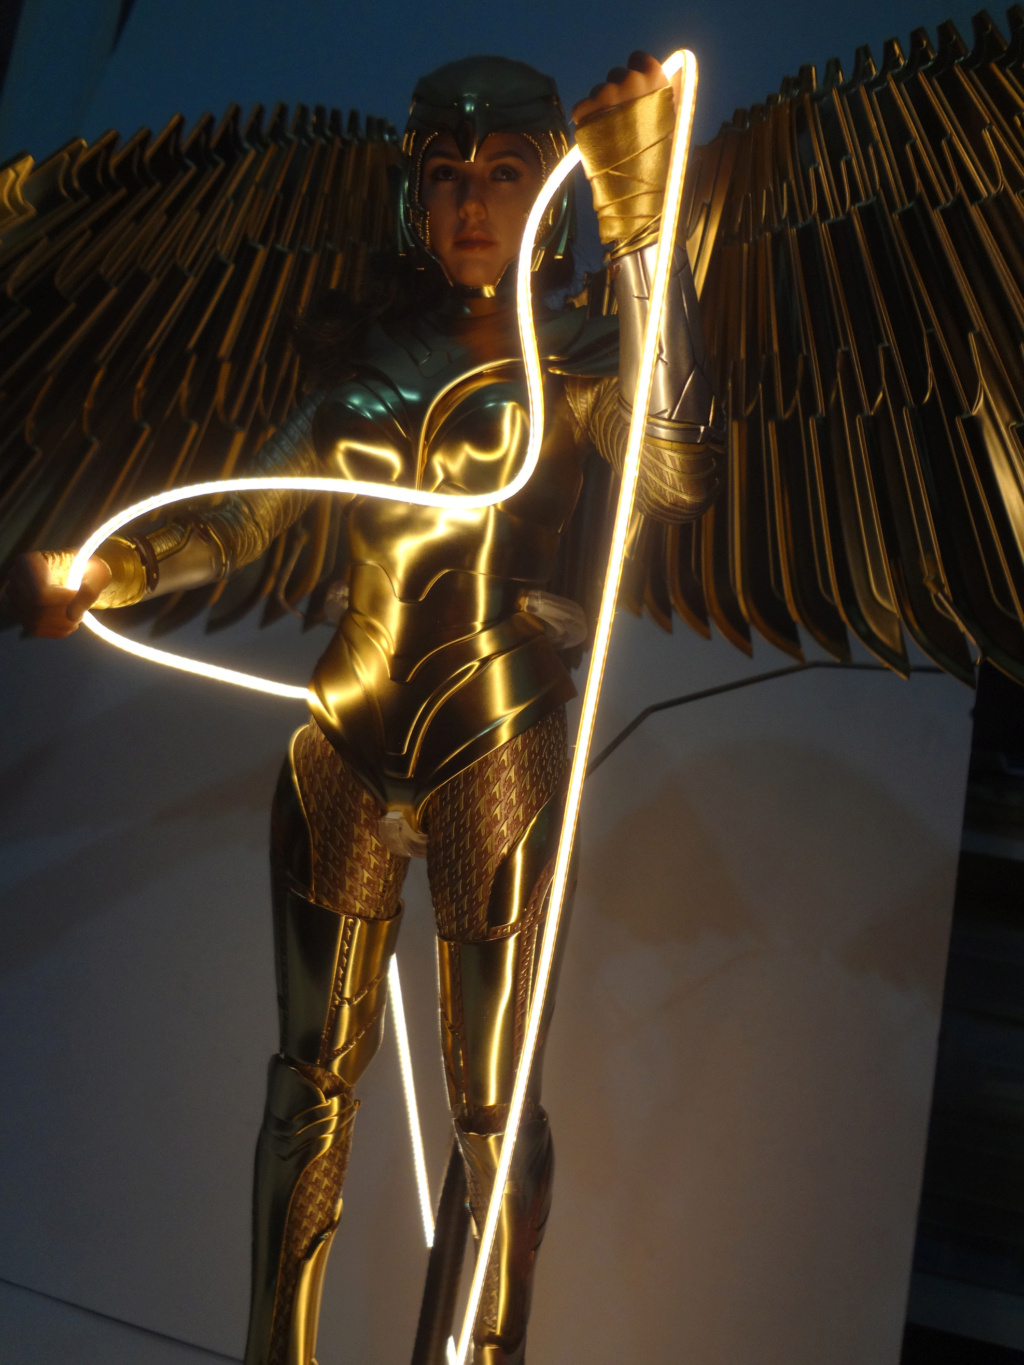 Female - NEW PRODUCT: HOT TOYS: WONDER WOMAN 1984: GOLDEN ARMOR WONDER WOMAN 1/6TH SCALE COLLECTIBLE FIGURE (Standard & Deluxe Versions) - Page 2 Dsc04217